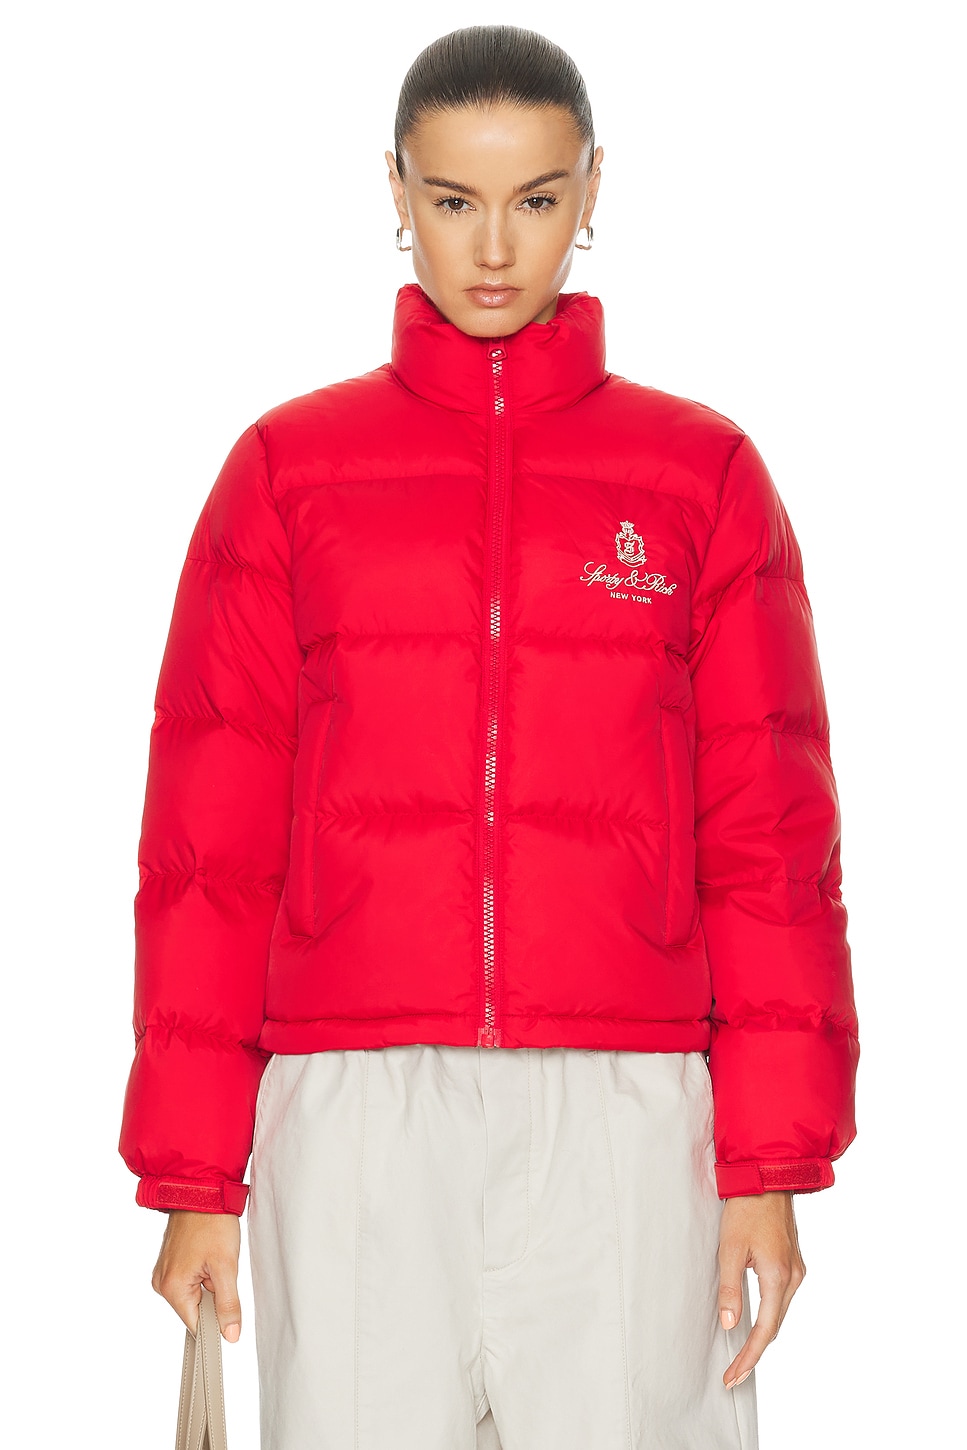 Image 1 of Sporty & Rich Vendome Puffer Jacket in Sports Red & Cream